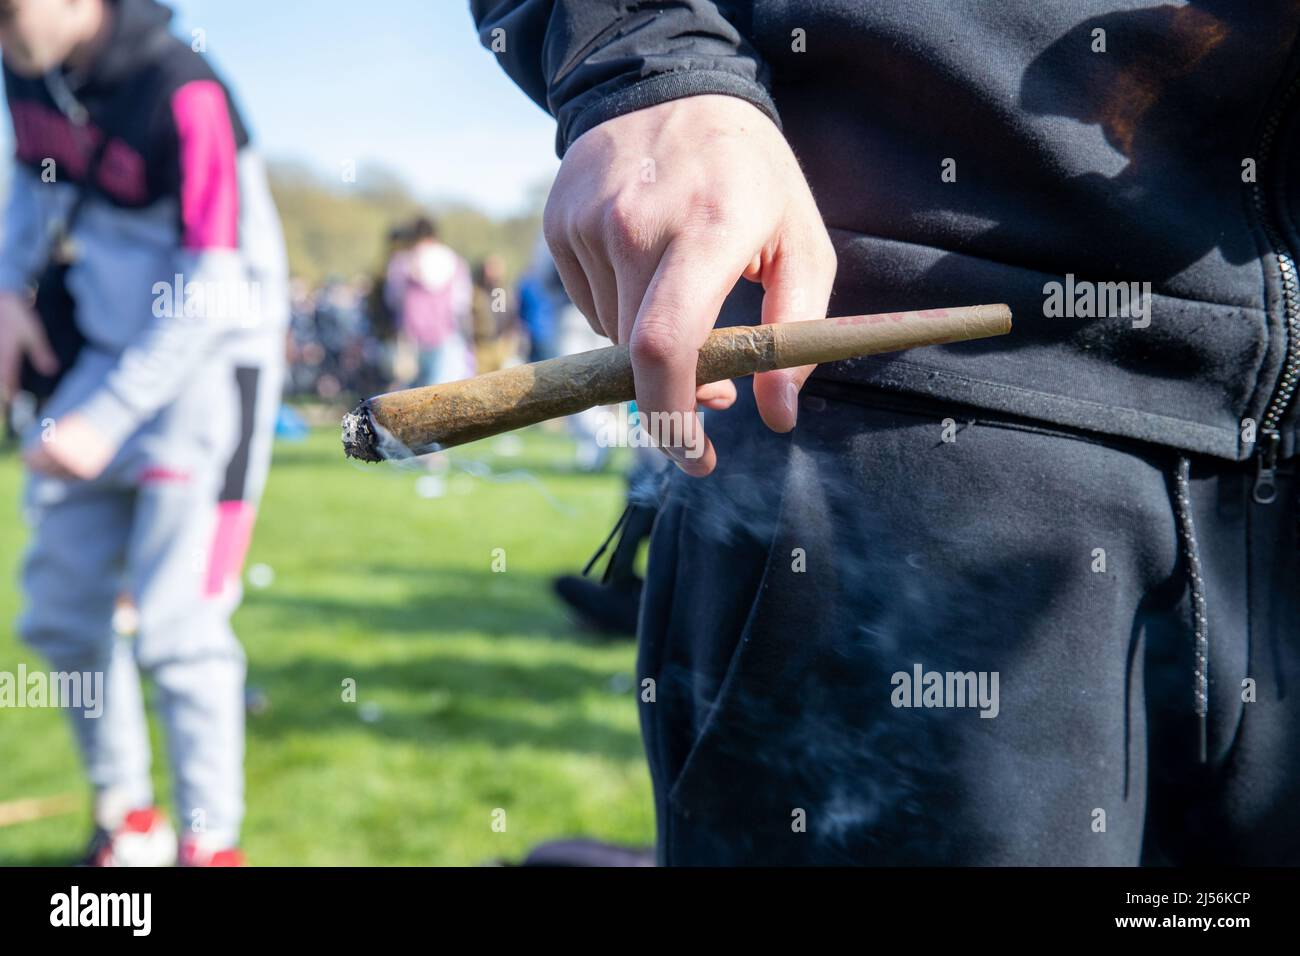 LONDON, APRIL 20 2022. Thousands gather in London's Hyde Park to celebrate 4/20 otherwise known as World Weed Day,: The event is observed annually across the world by cannabis smokers in protest for the legalization of marijuana. Stock Photo